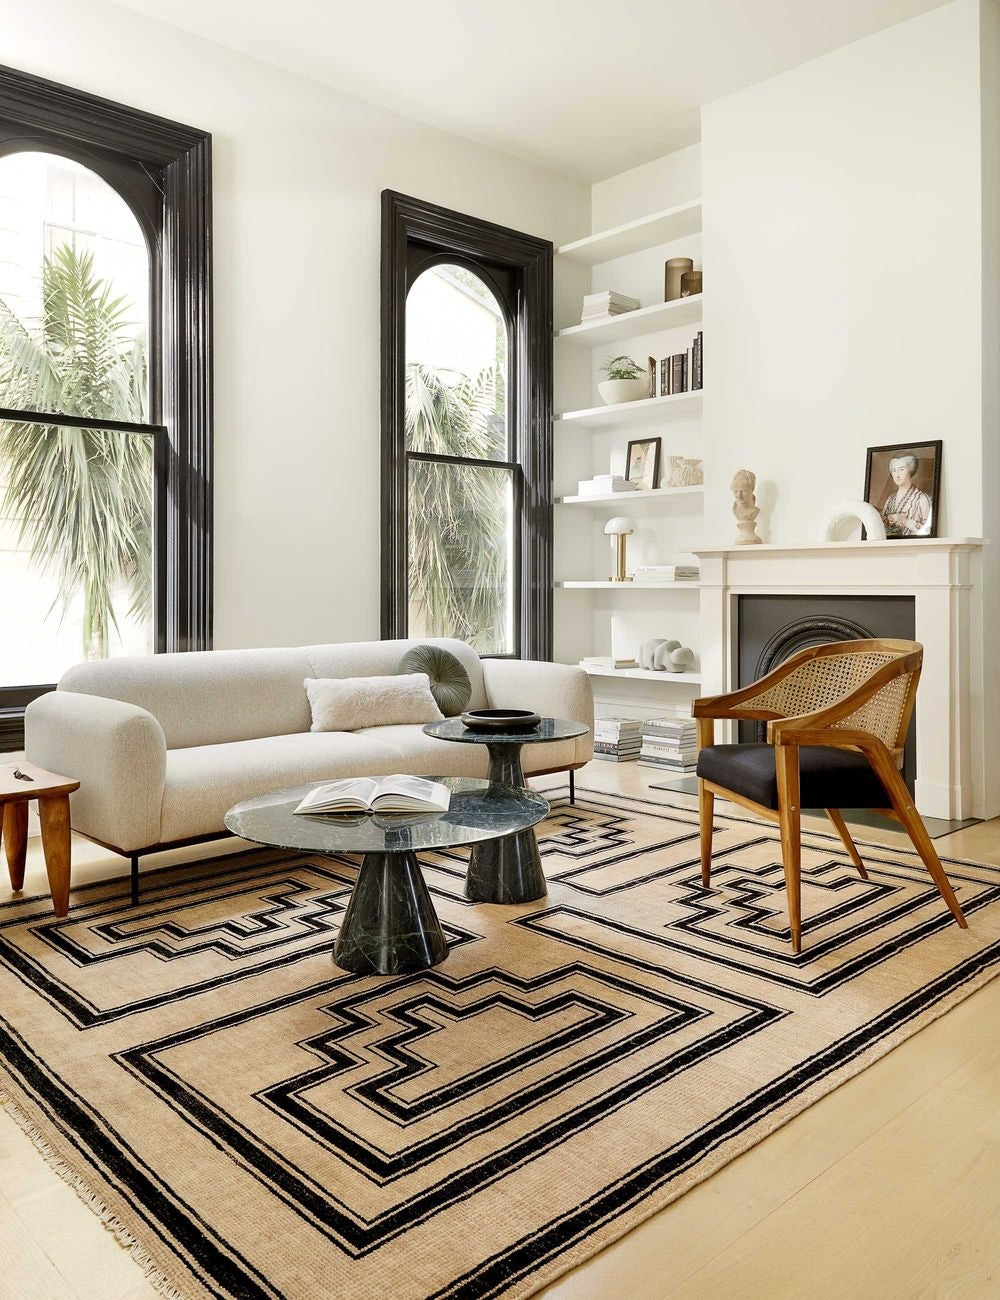 How To Use Rugs To Make A Room Look Bigger, Tufenkian